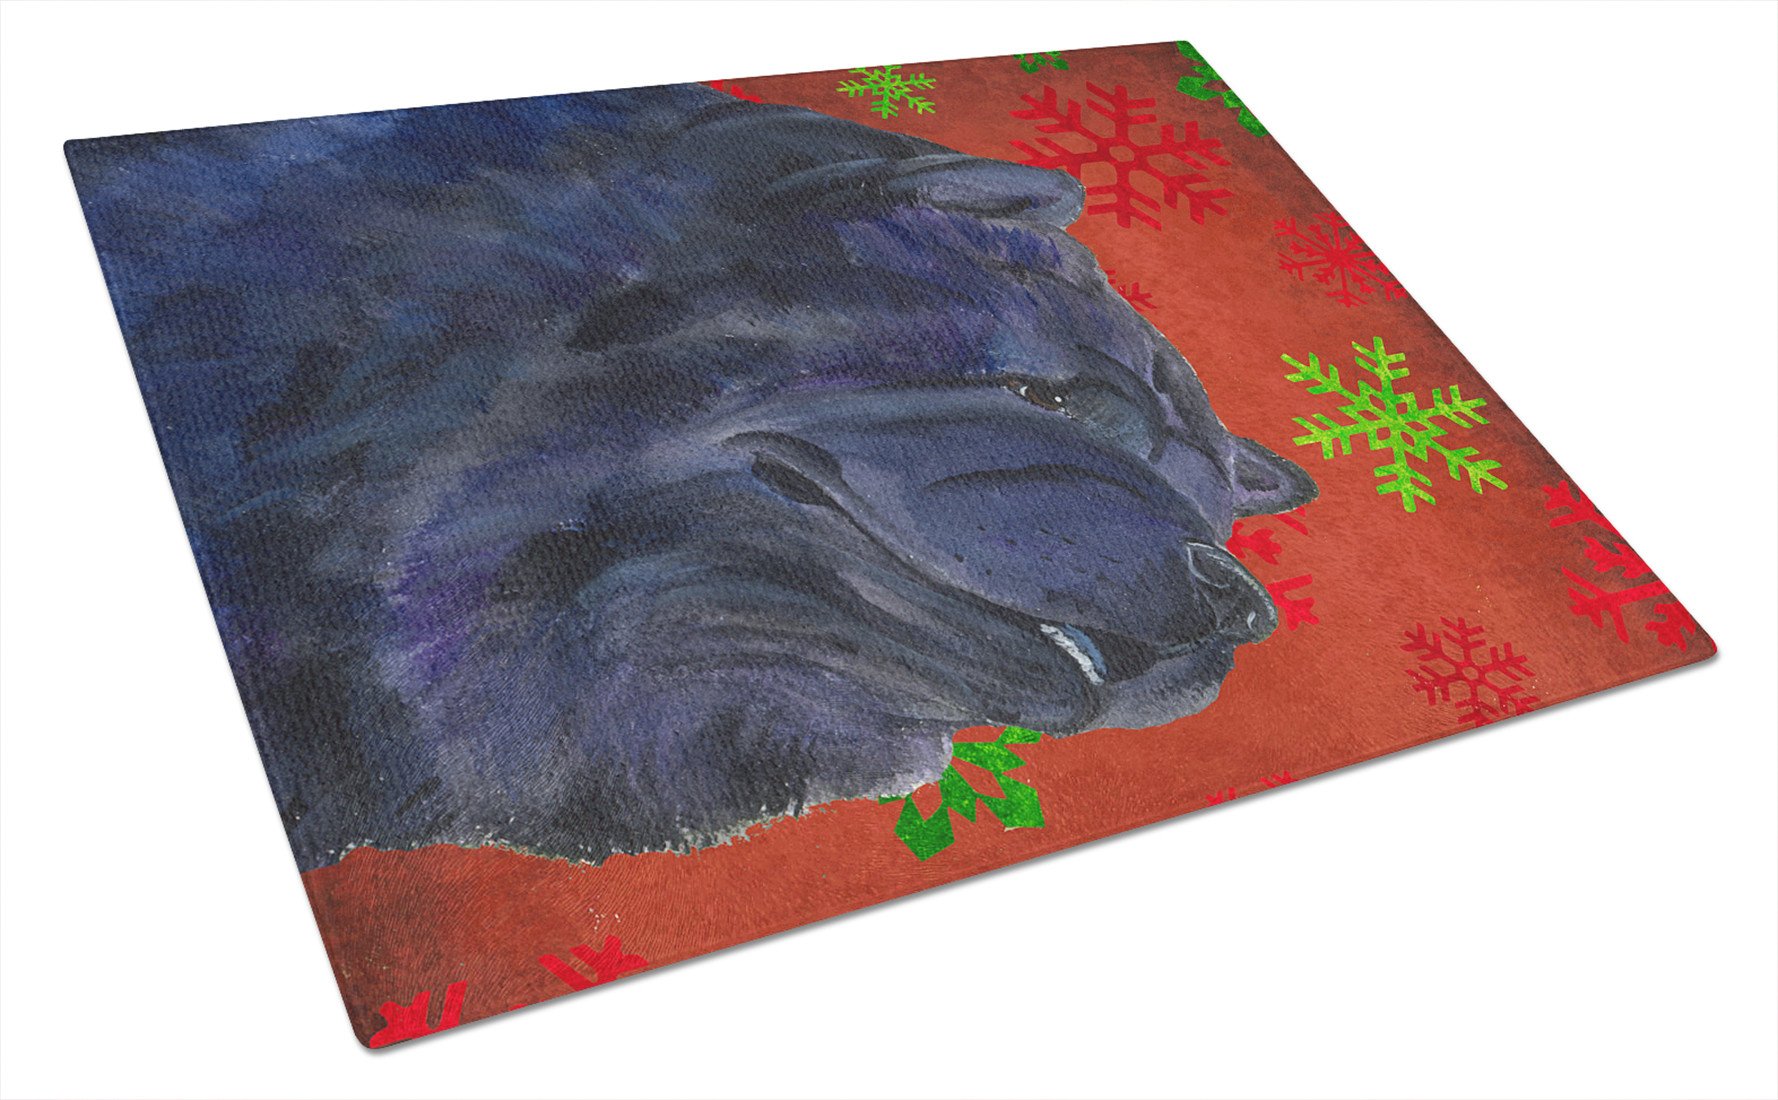 Chow Chow Red and Green Snowflakes Holiday Christmas Glass Cutting Board Large by Caroline's Treasures